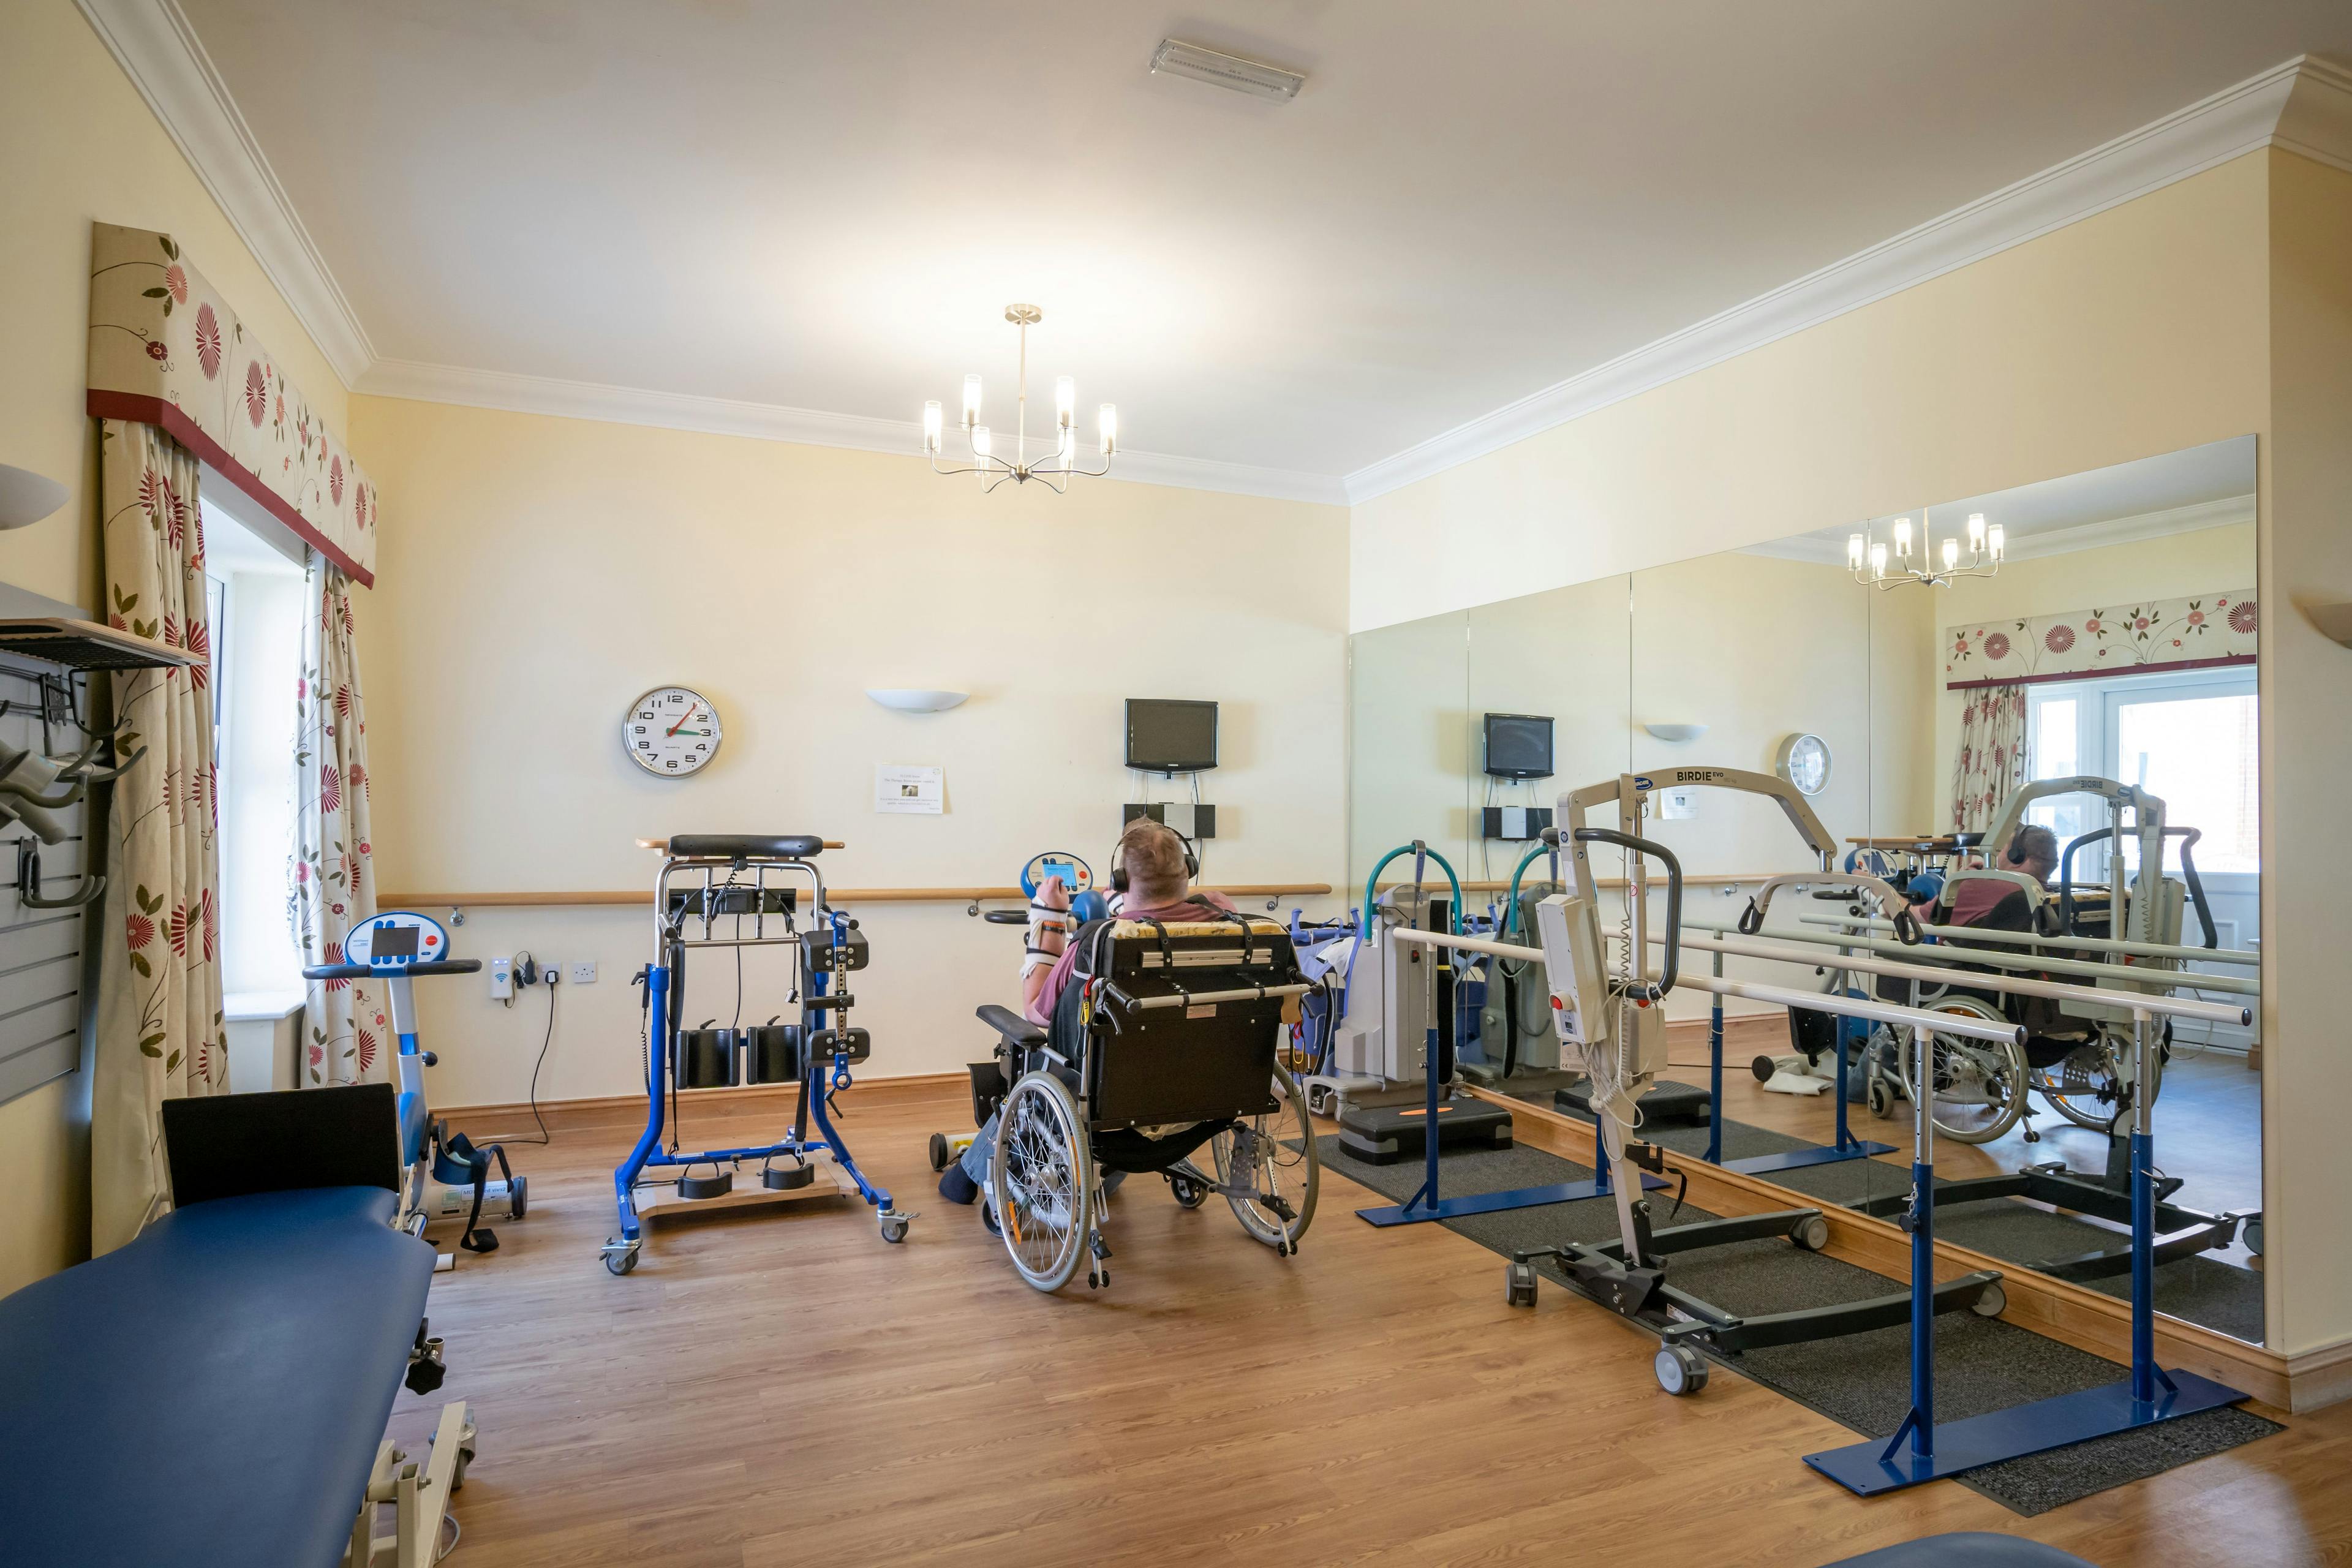 Gym of Branksome Park care home in Poole, Dorset